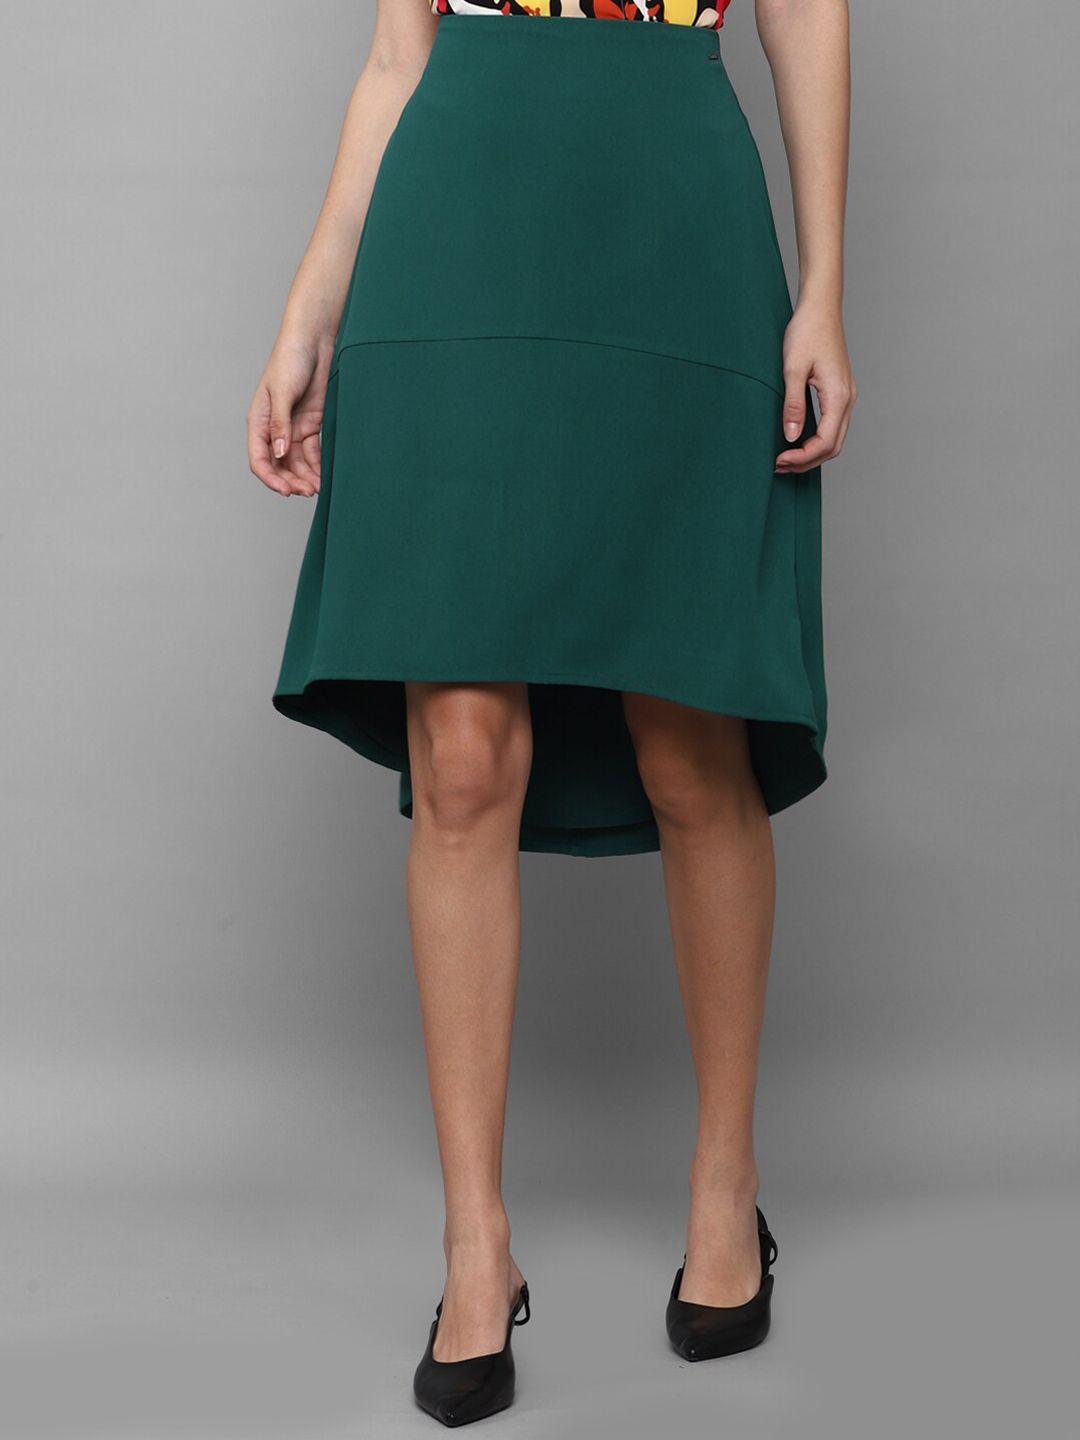 allen solly woman green solid a-line high-low skirt